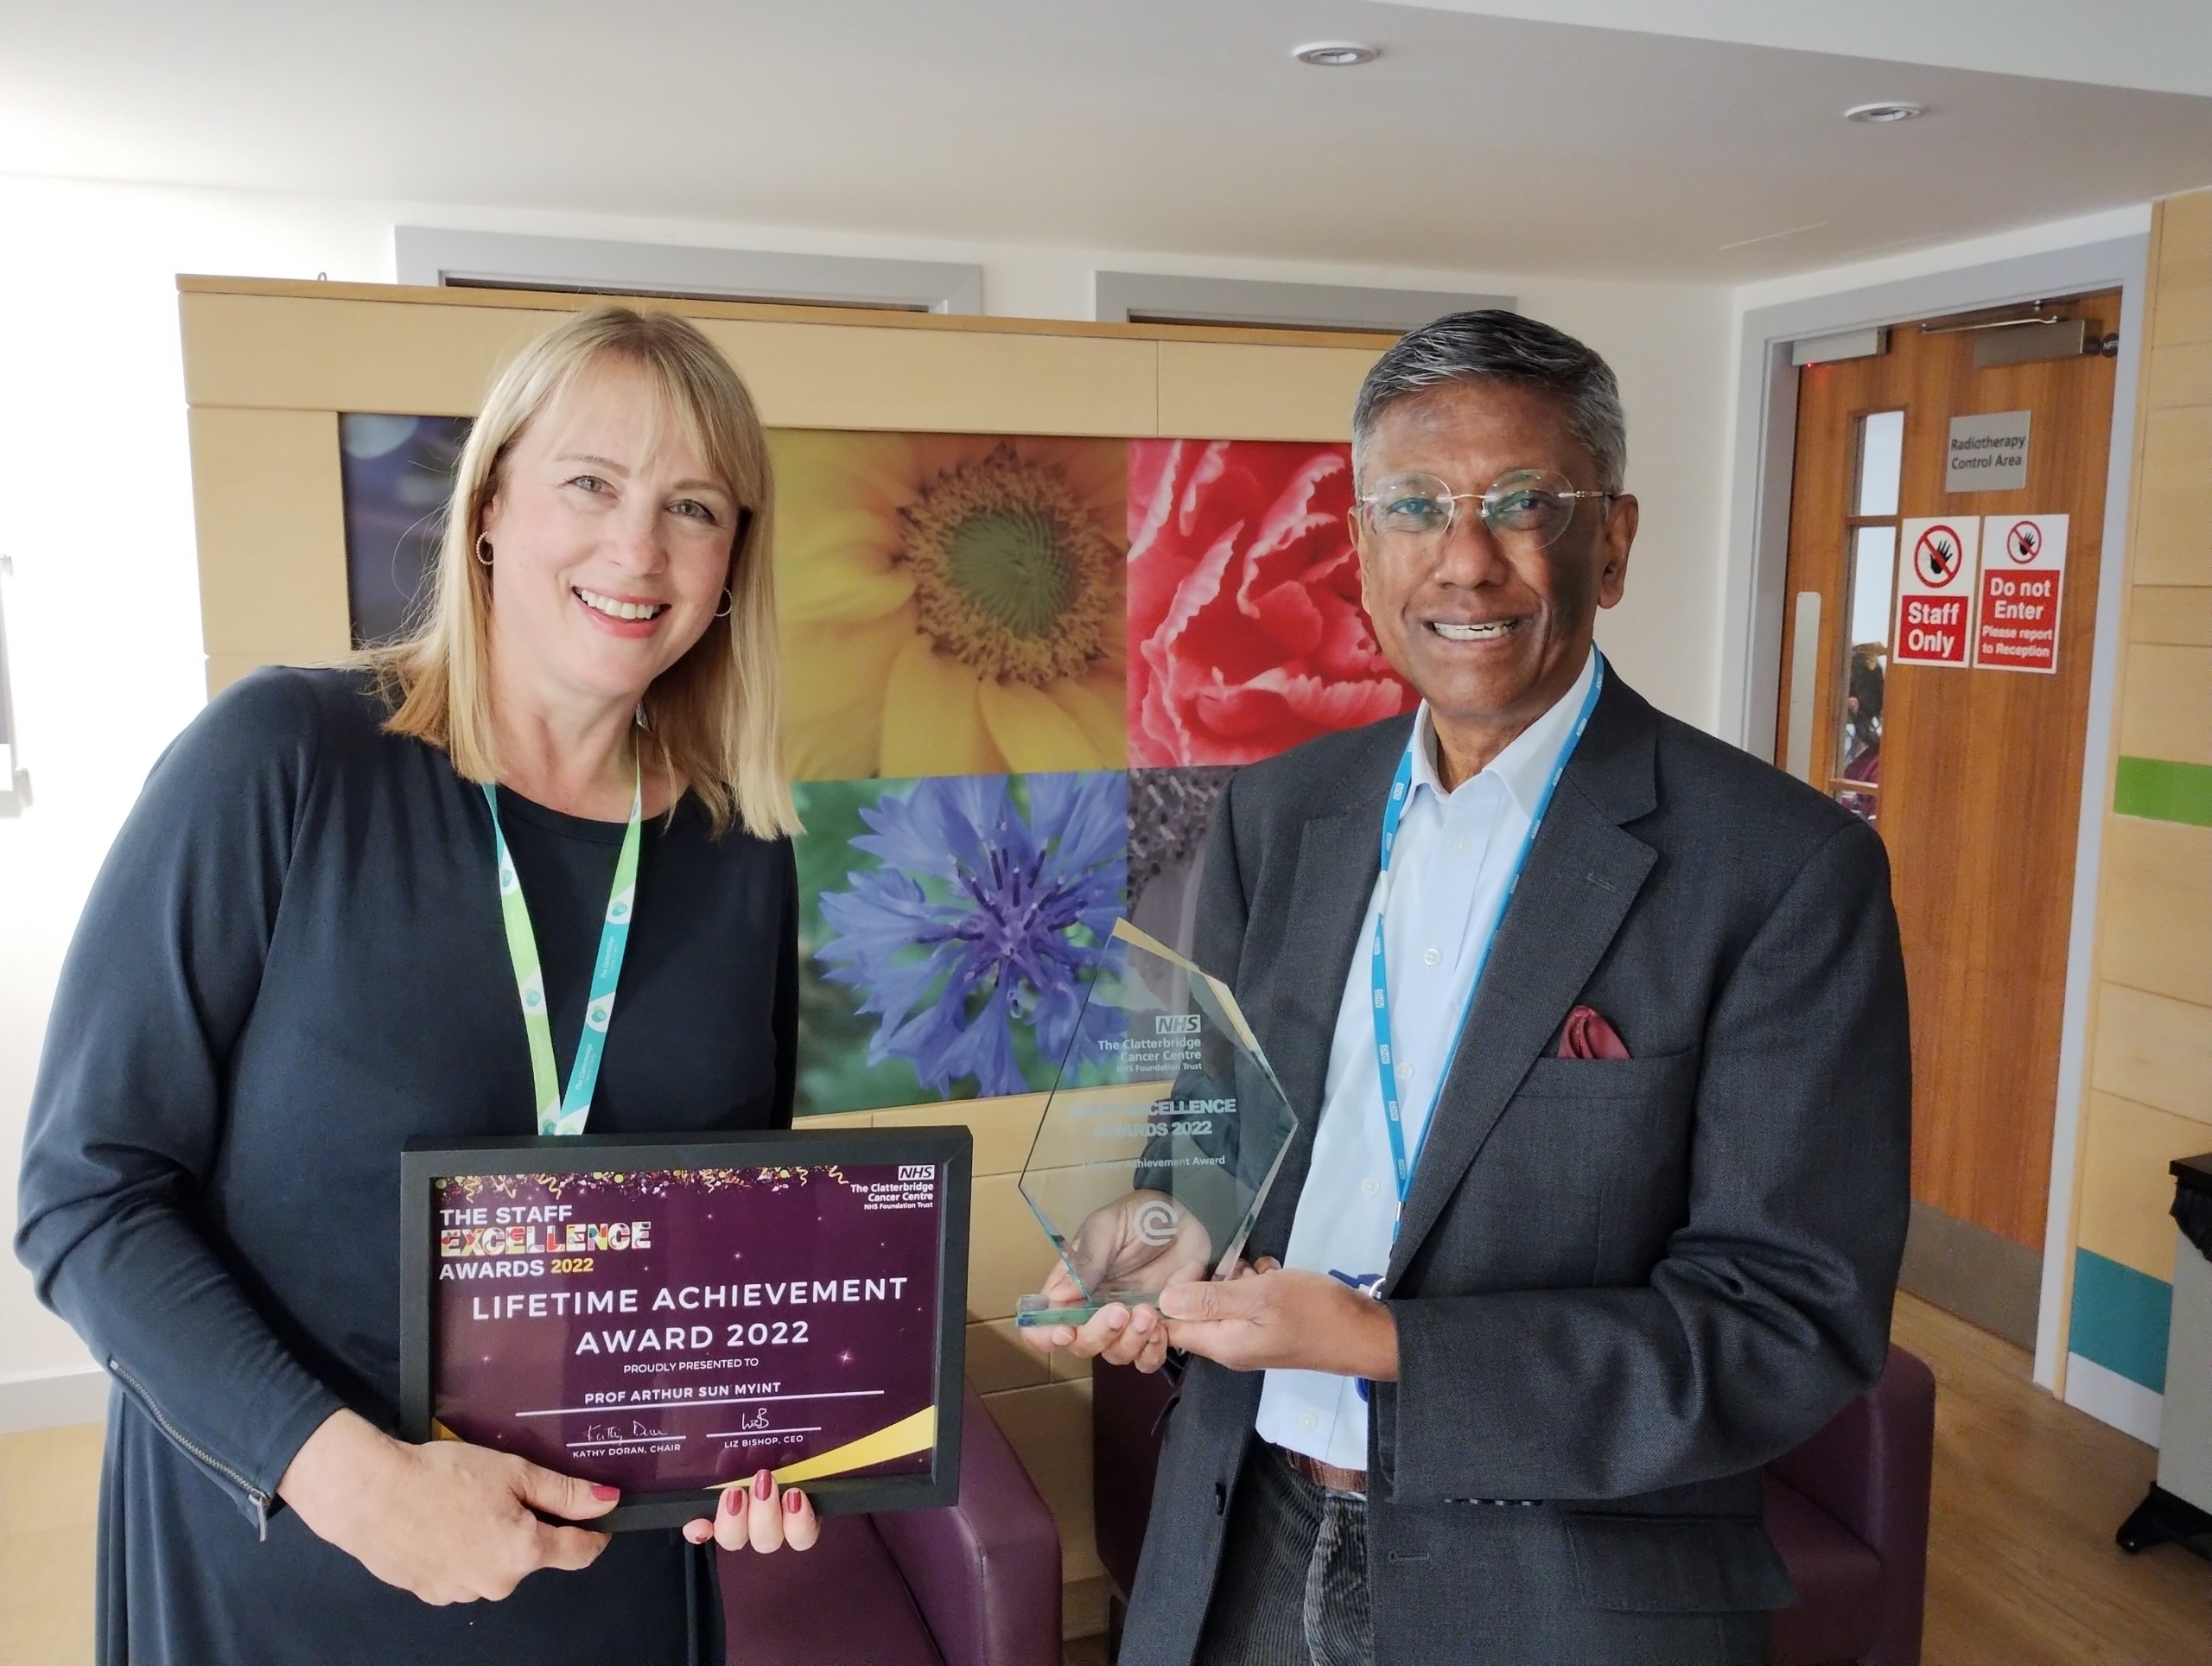 Chief Executive Liz Bishop is smiling and standing on the left holding a certificate that says 'Lifetime Achievement Award'. Prof Myint is on the right holding a glass awards trophy.